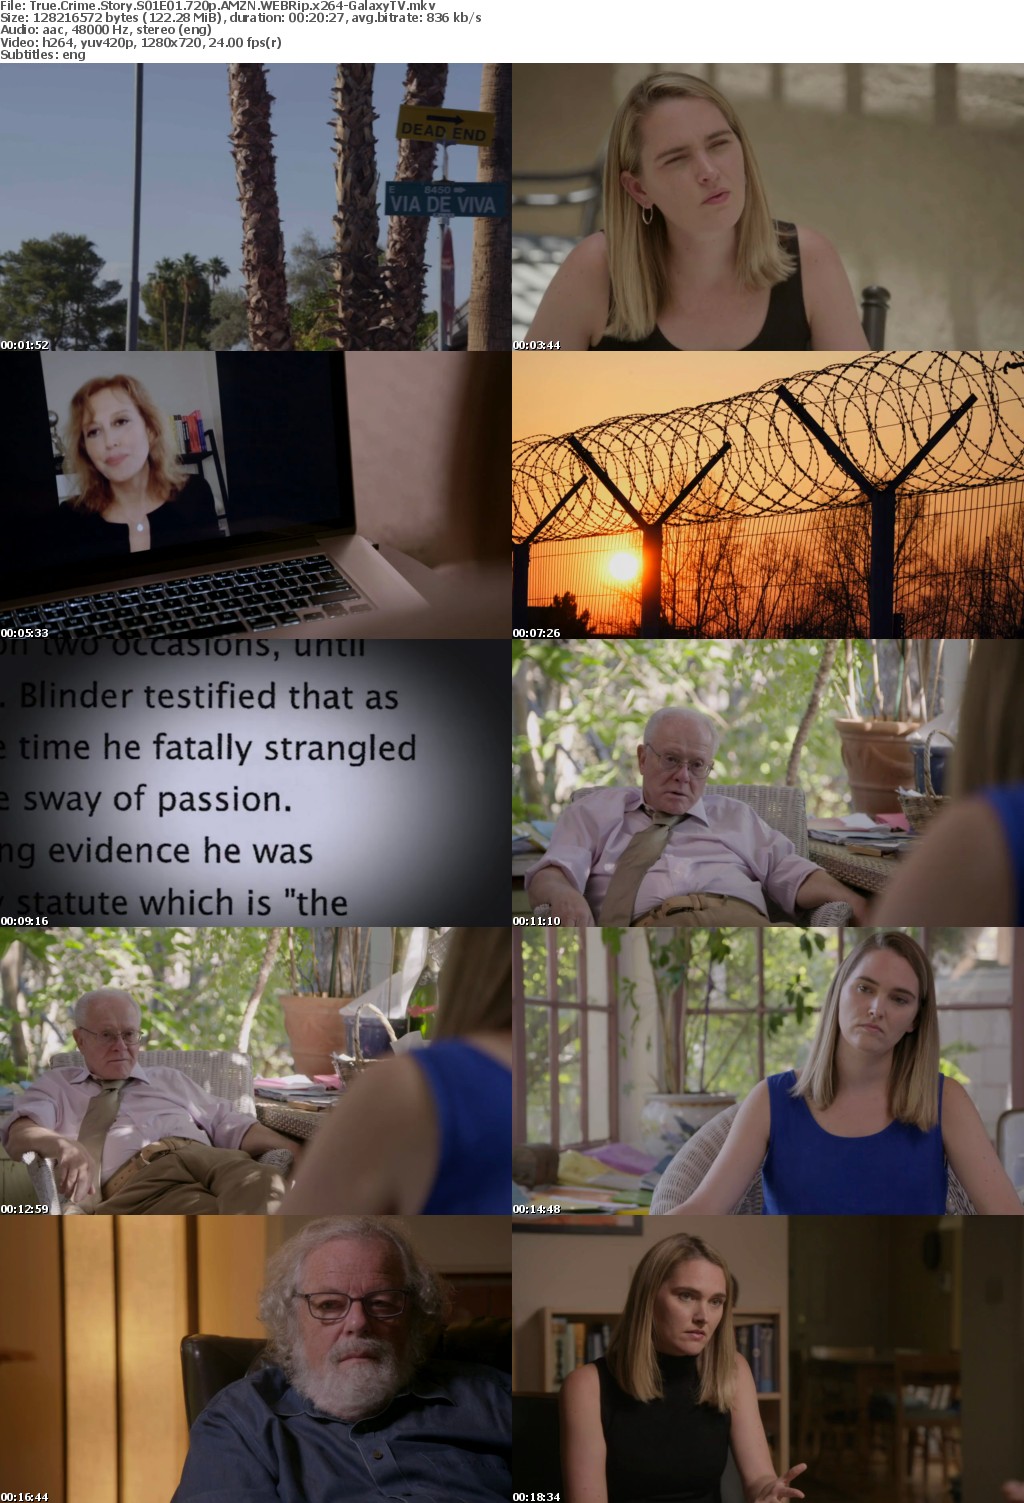 True Crime Story Indefensible S01 COMPLETE 720p AMZN WEBRip x264-GalaxyTV